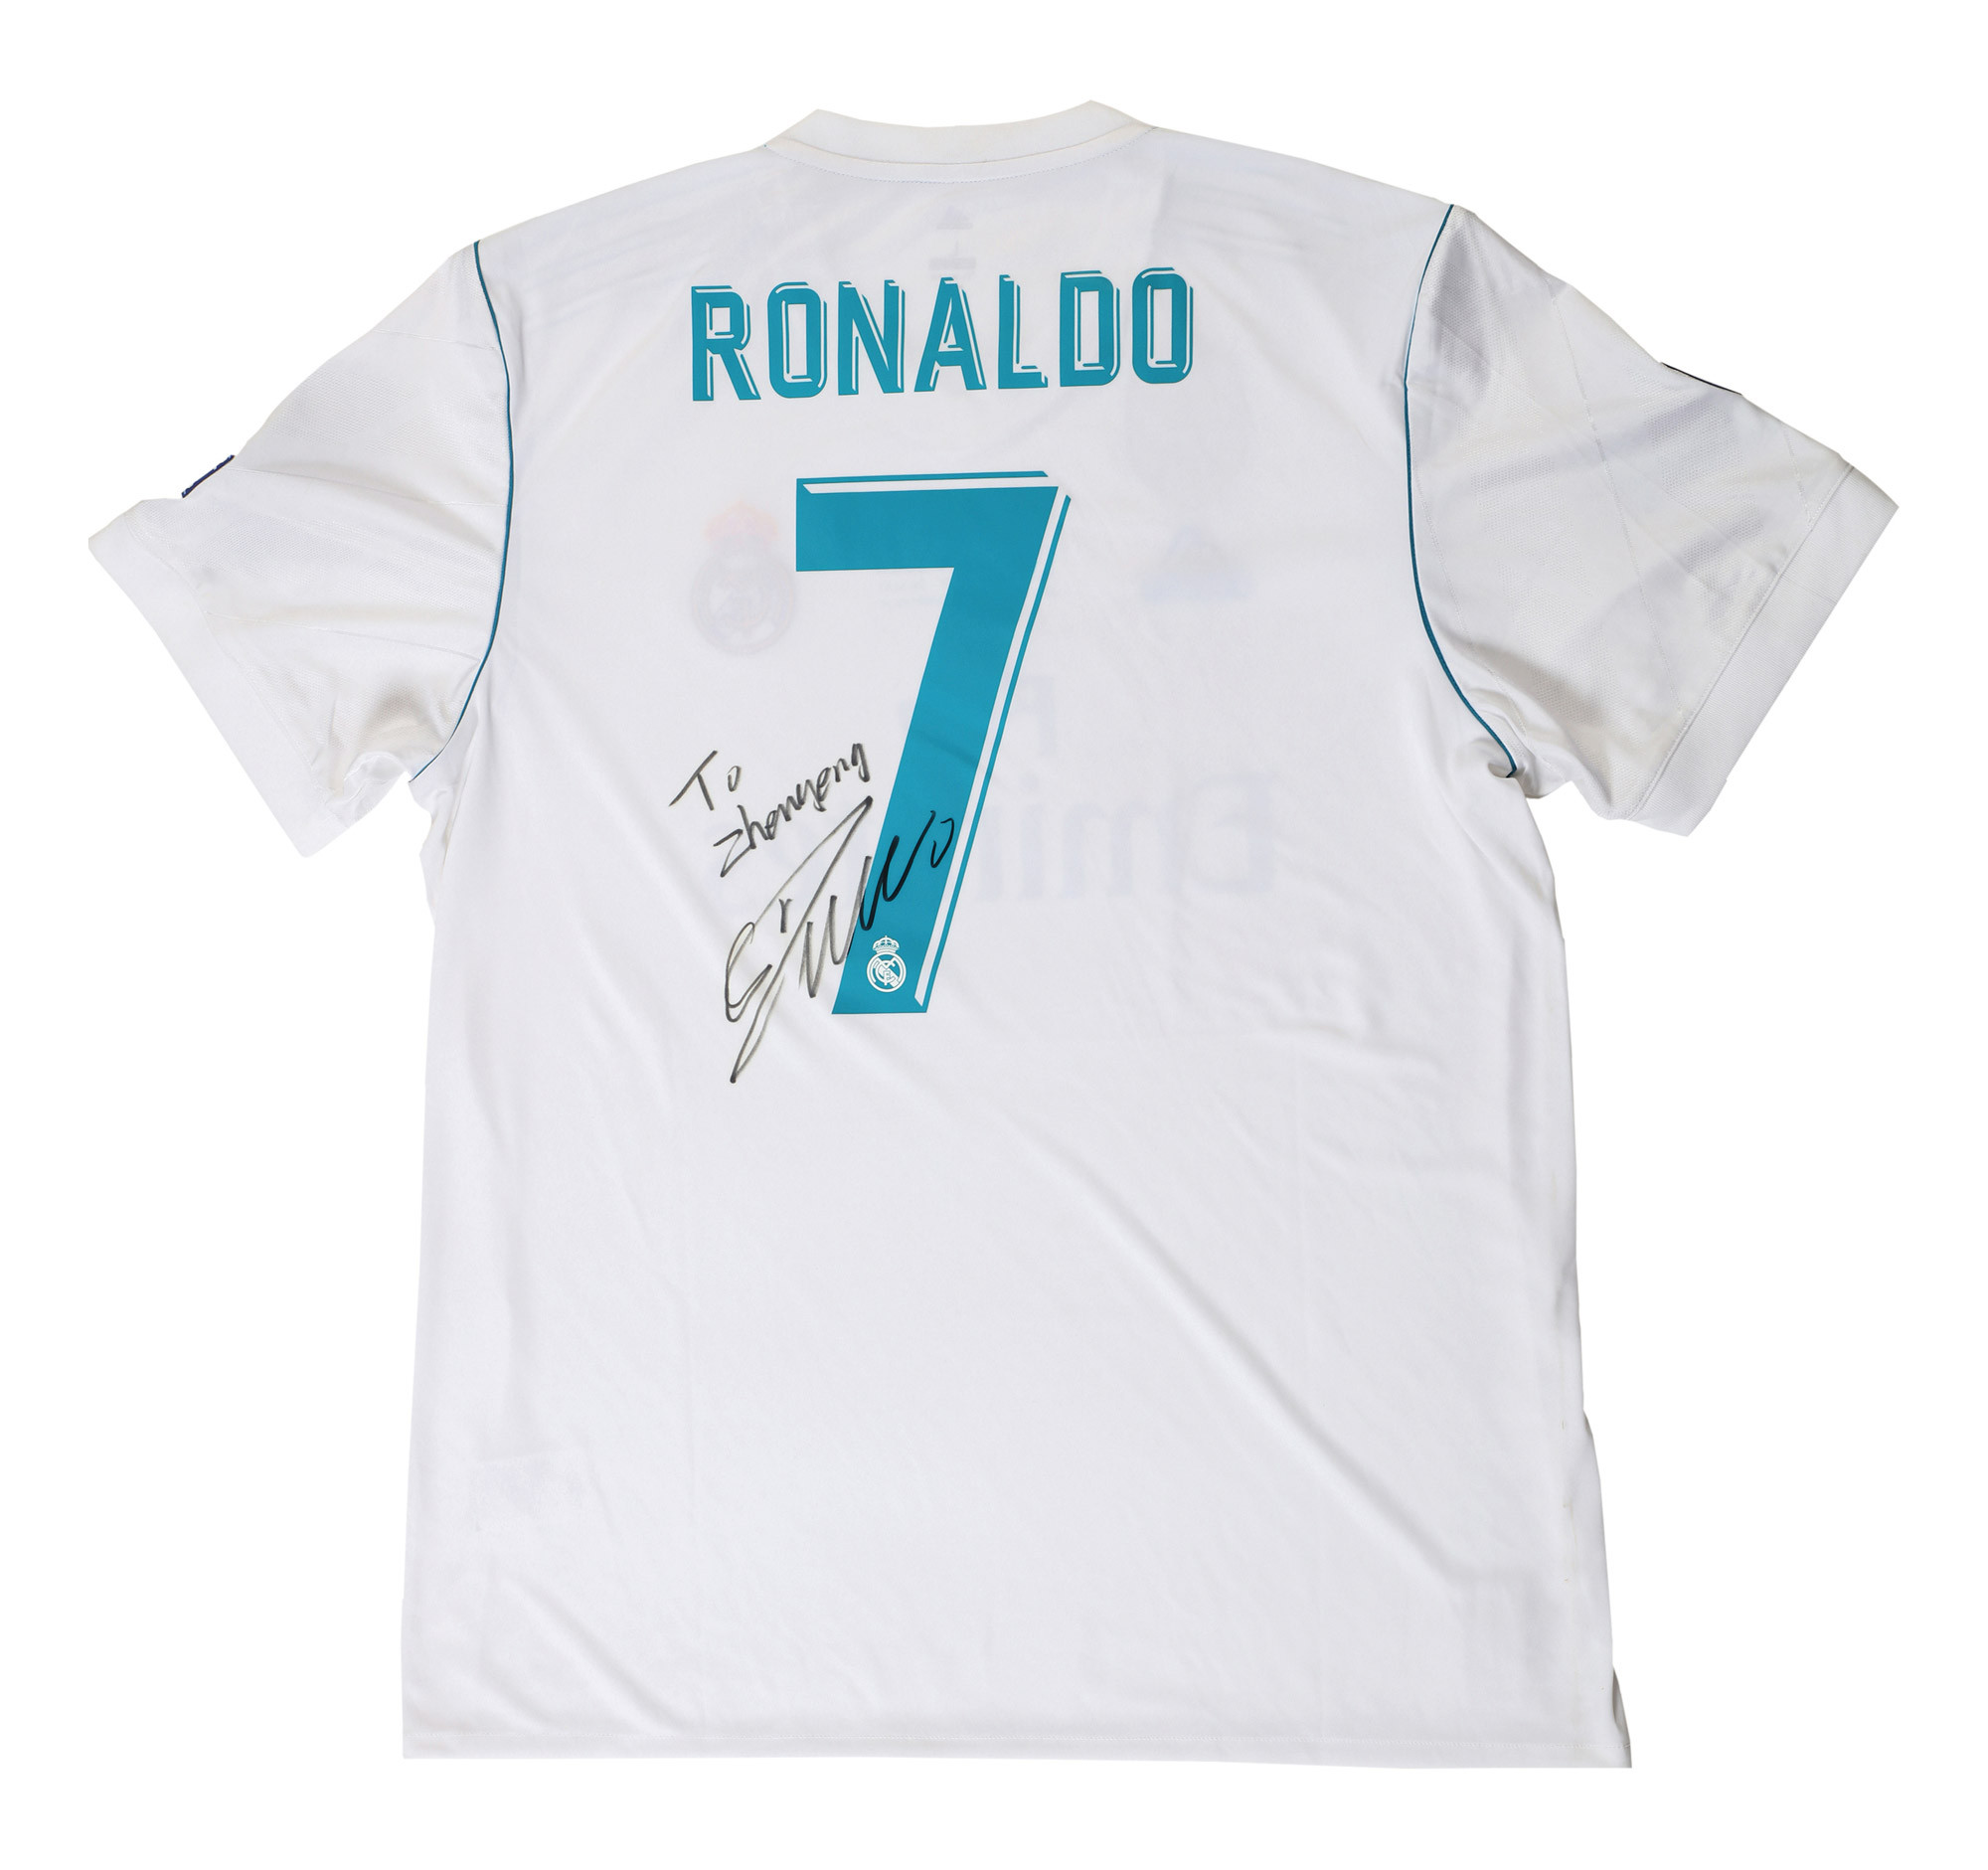 The autographed Real Madrid shirt signed by Cristiano Ronaldo, the “FIFA world player”, with certificate